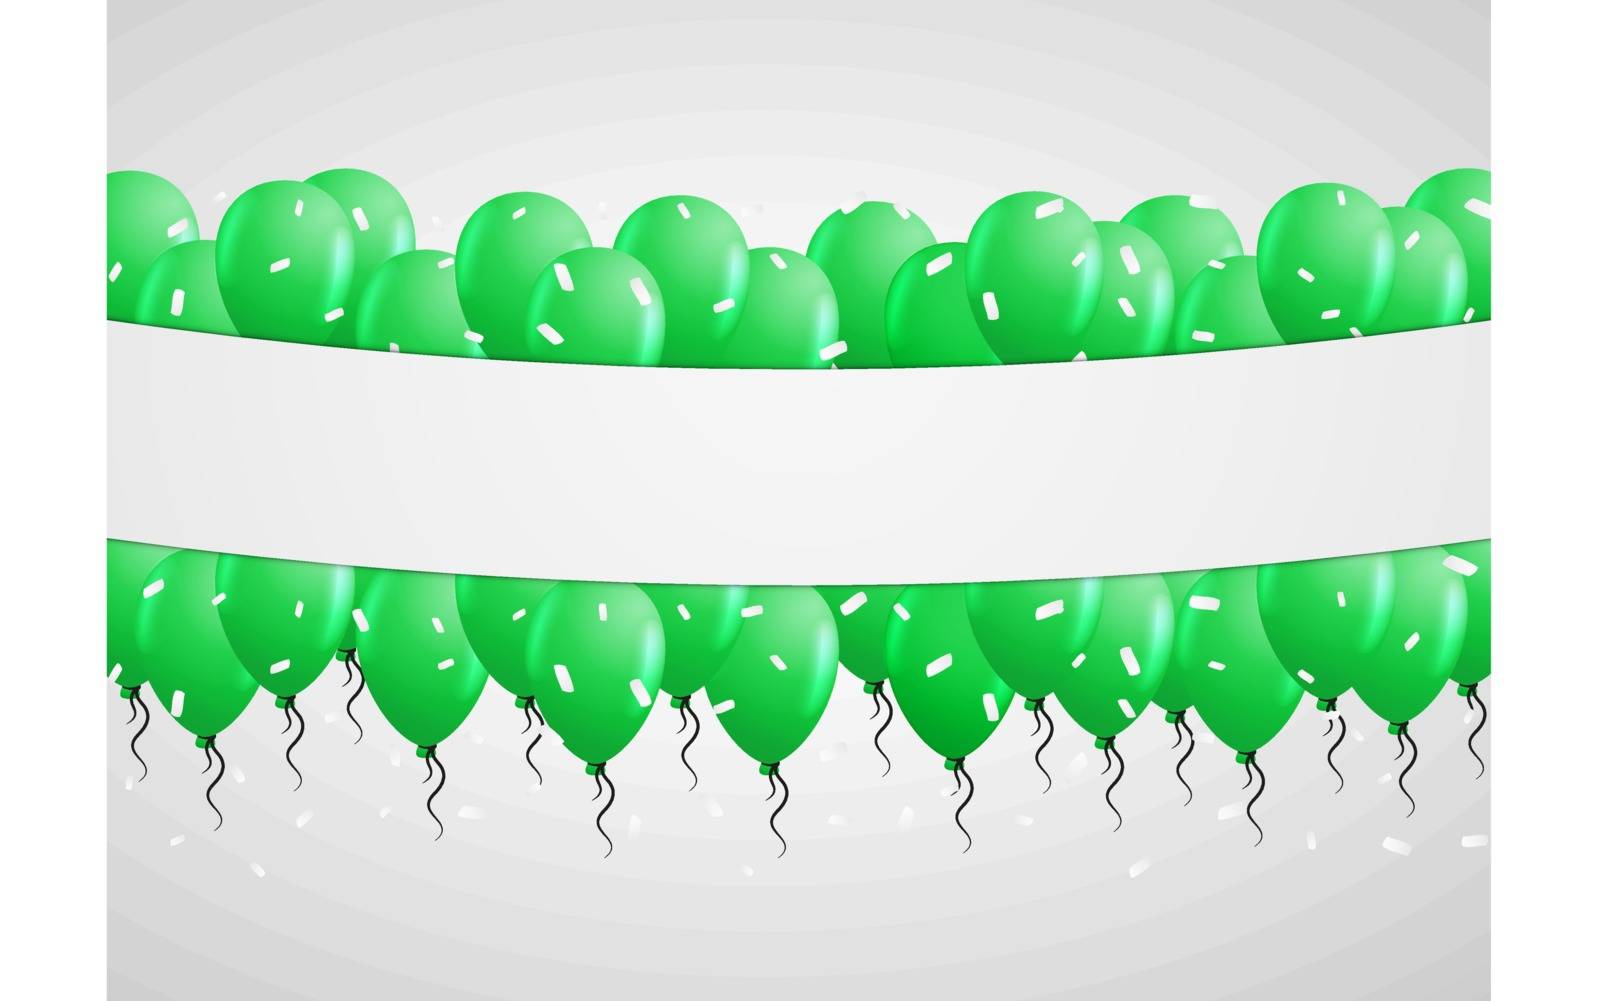 green balloons in center with falling white confetti and gray background